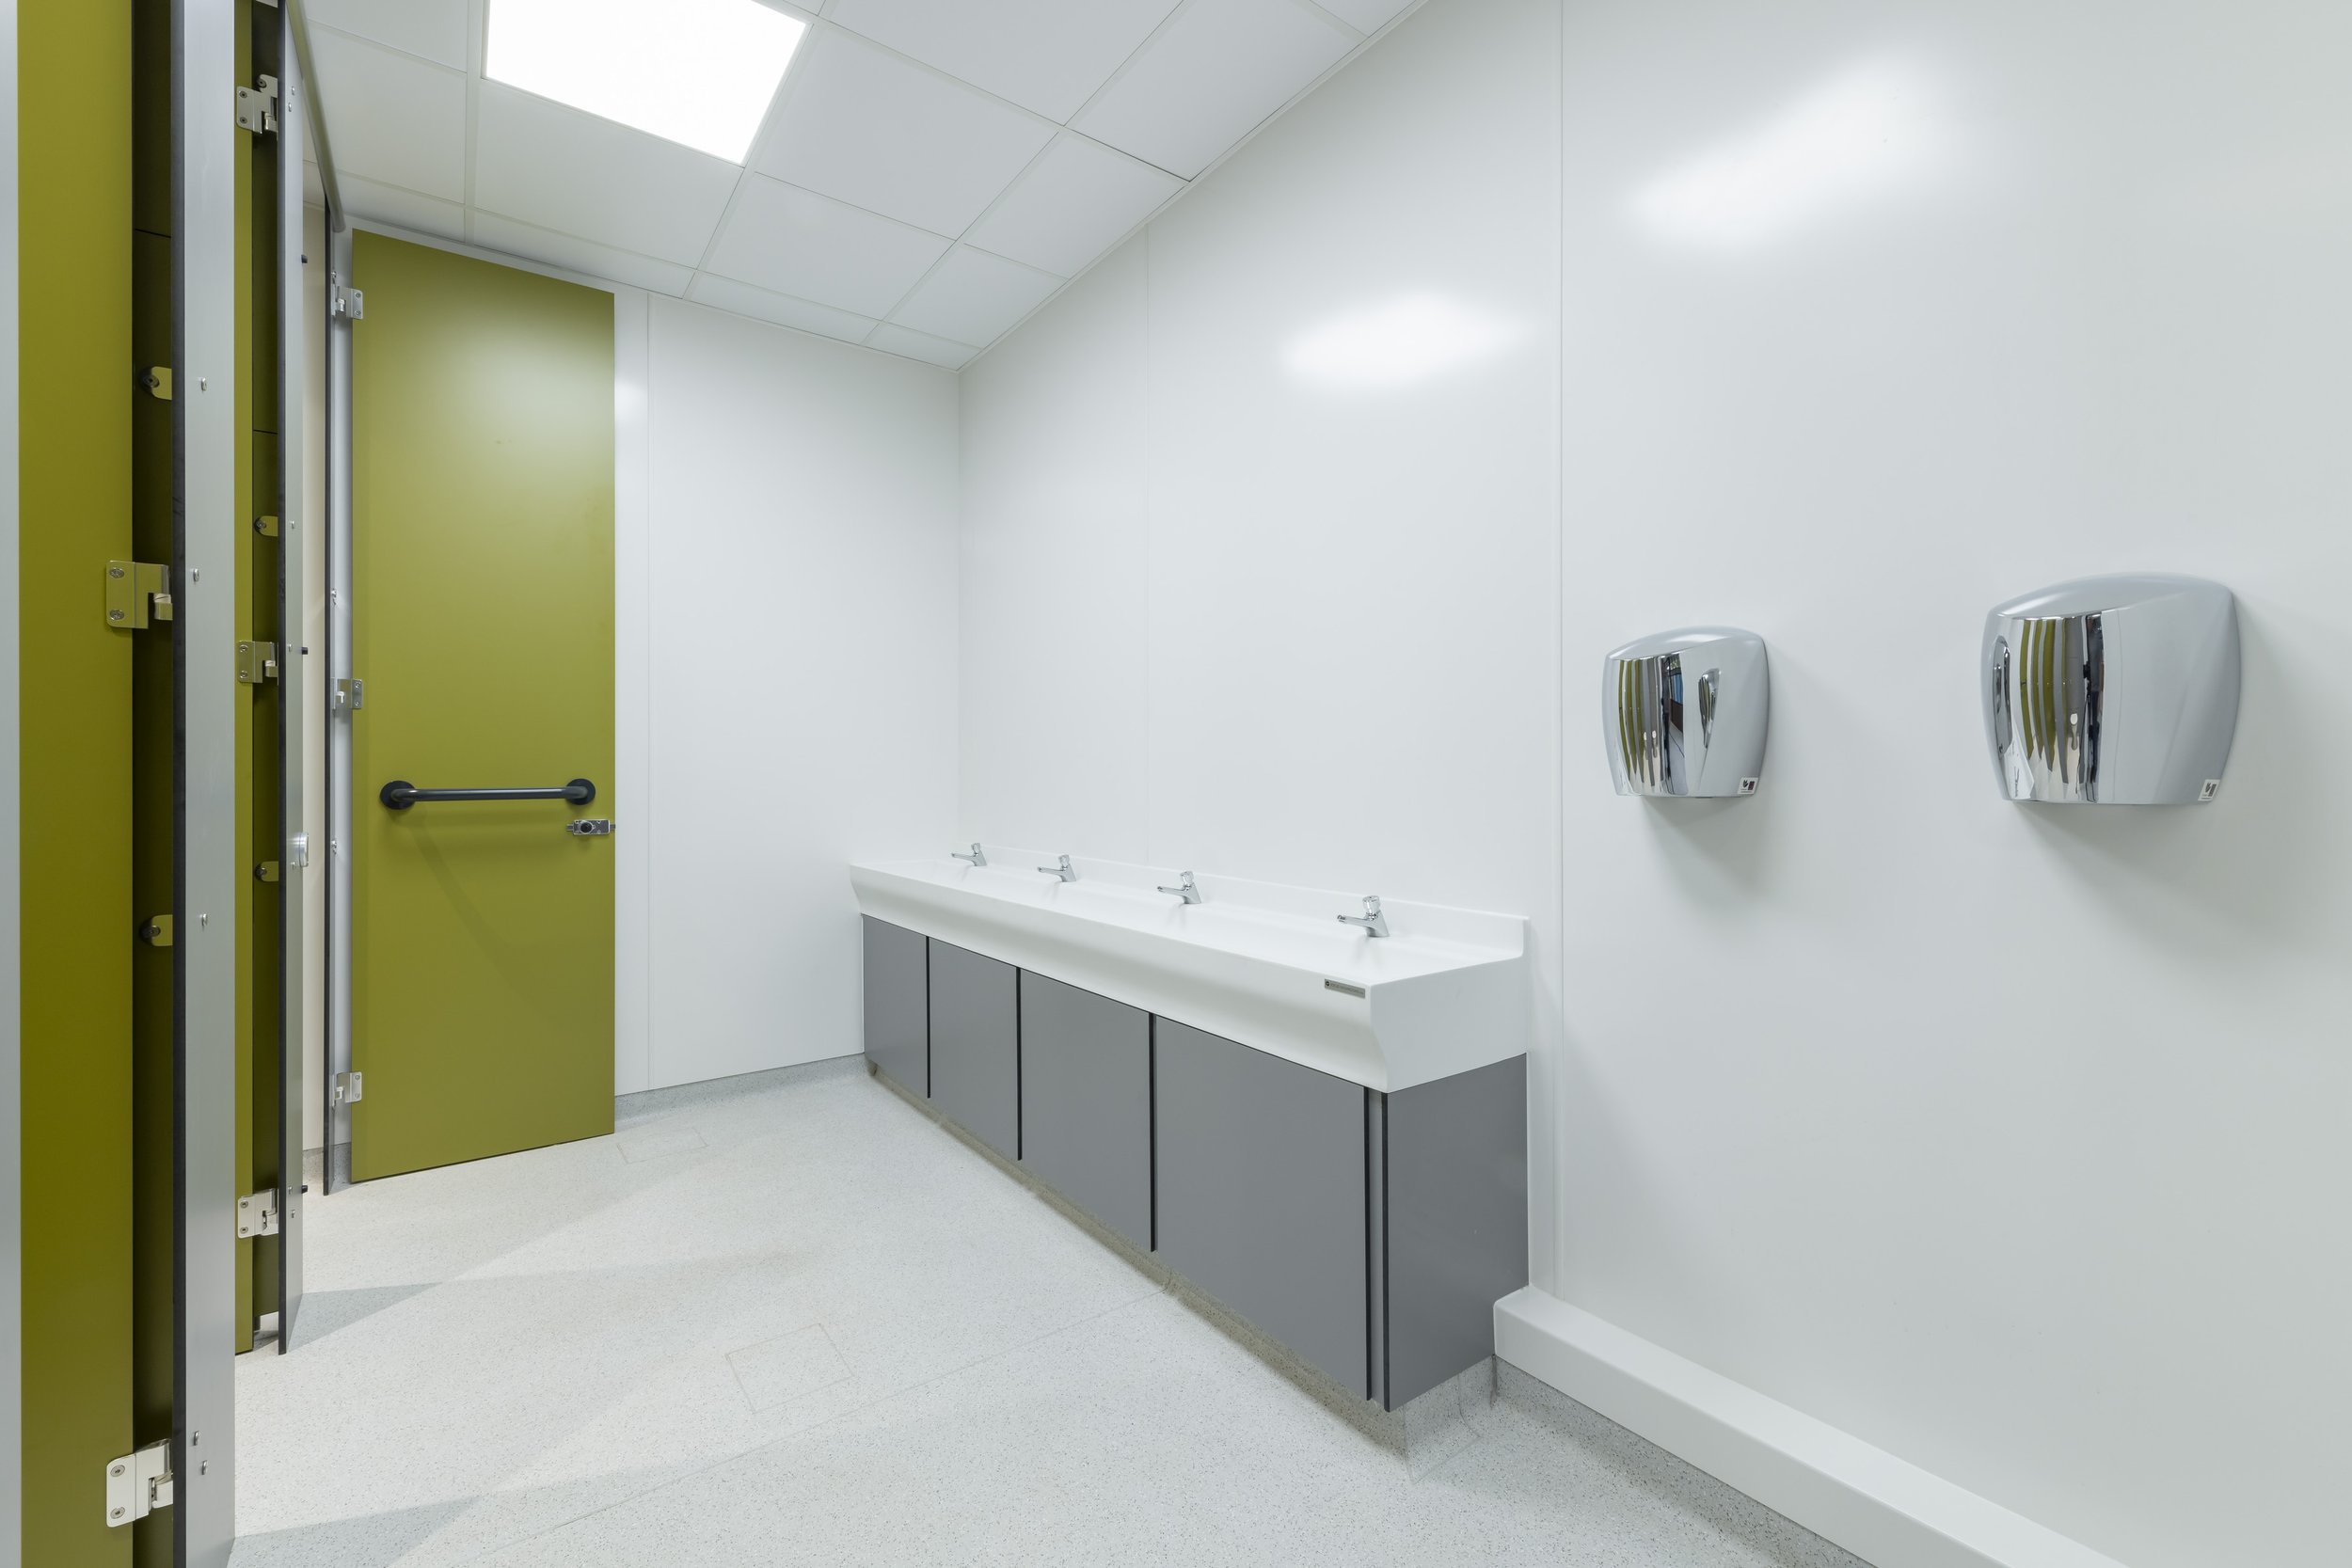 unisex toilet with green privacy toilet and a hand wash area with troughs and hand dryers.jpg